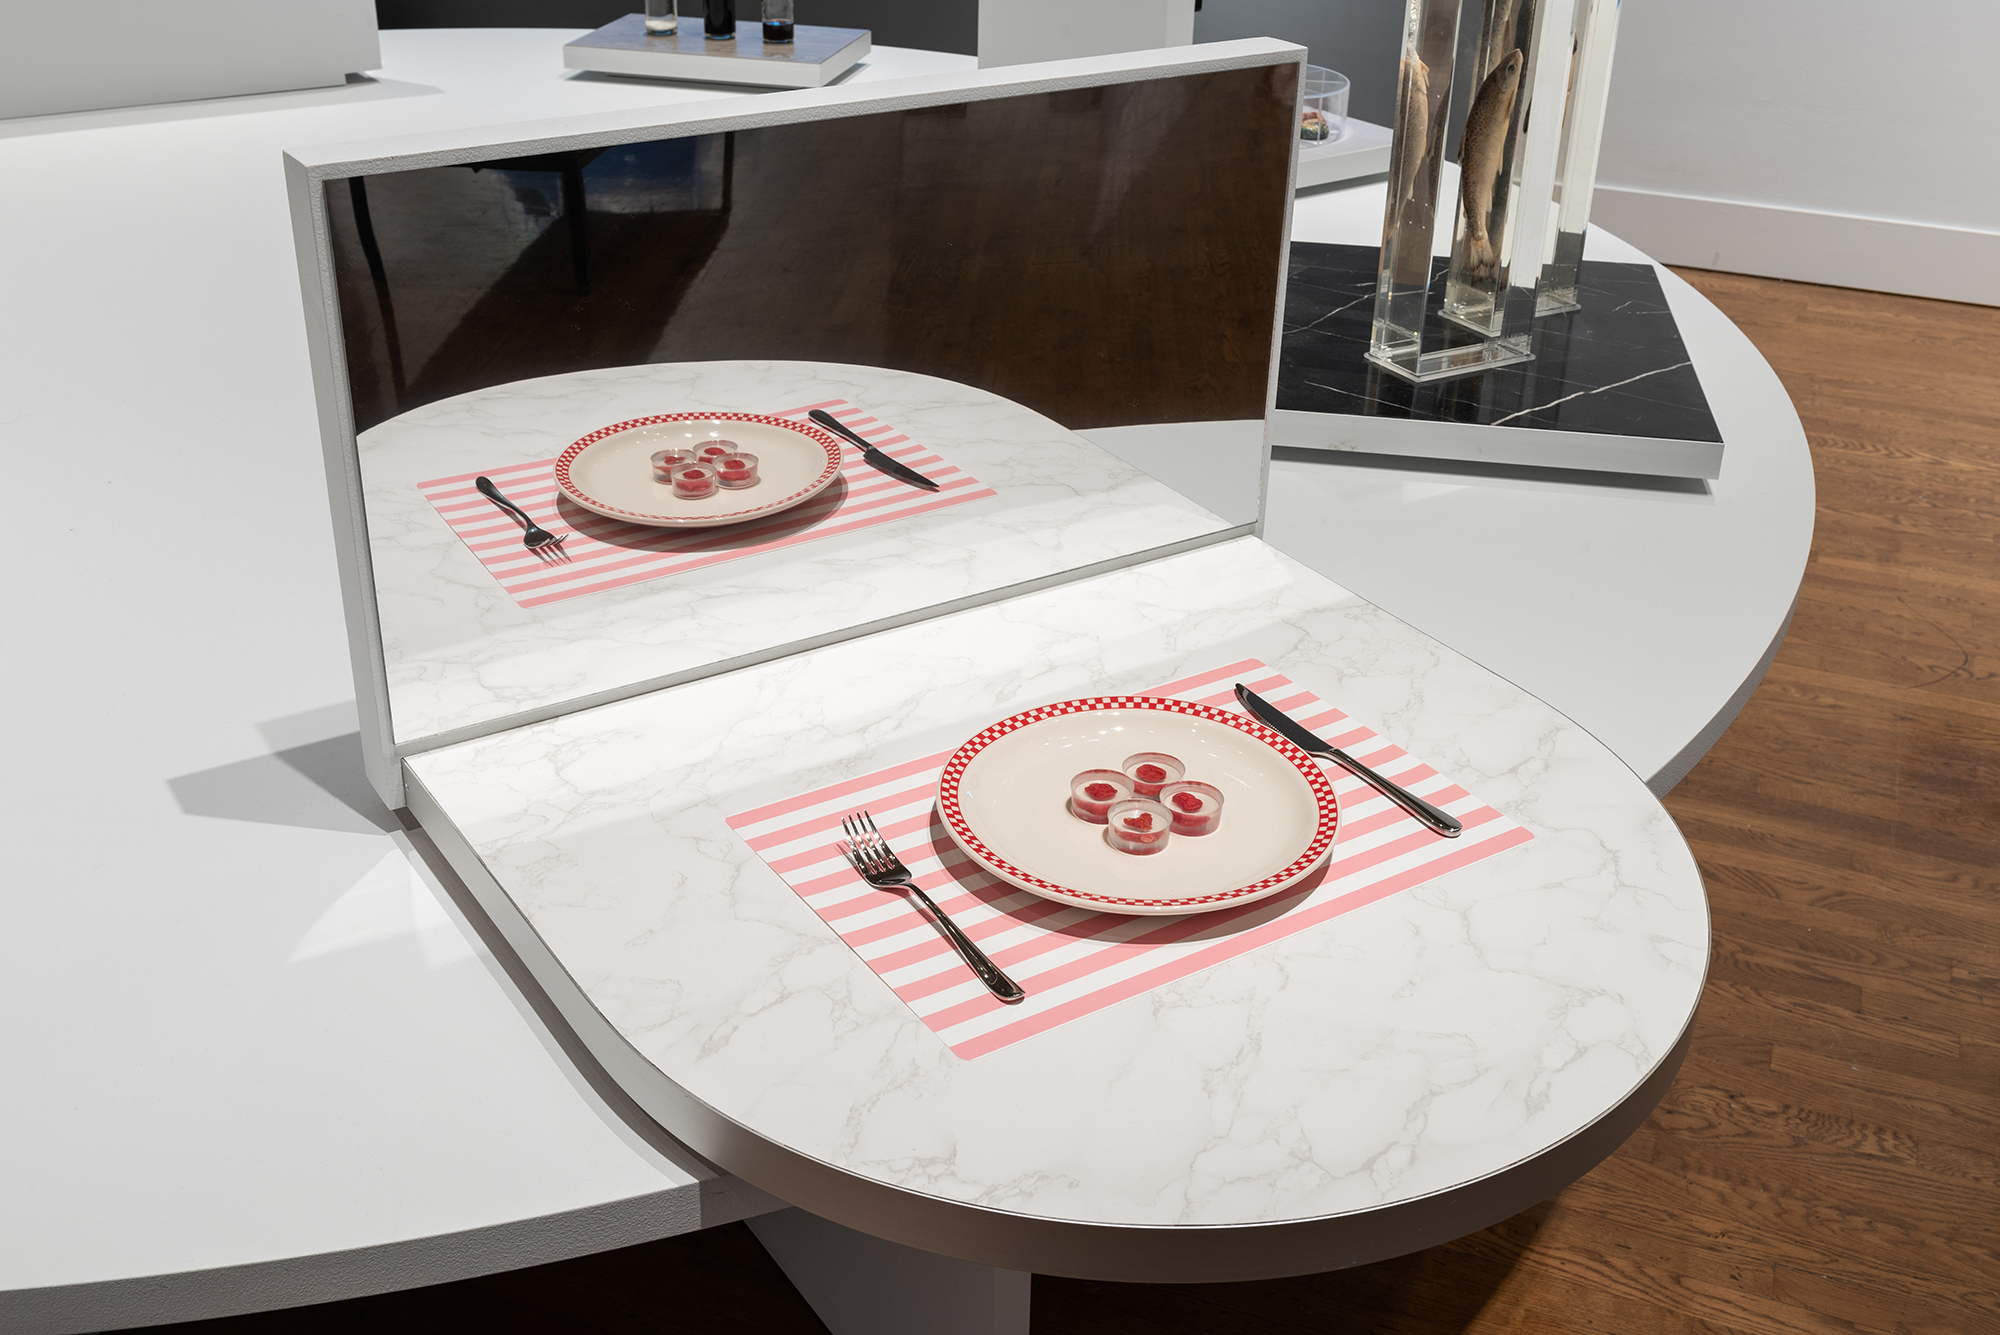  Plate of four pieces of faux steak on a placemat with a fork and knife on a marble surface at the Designs for Different Futures exhibit.